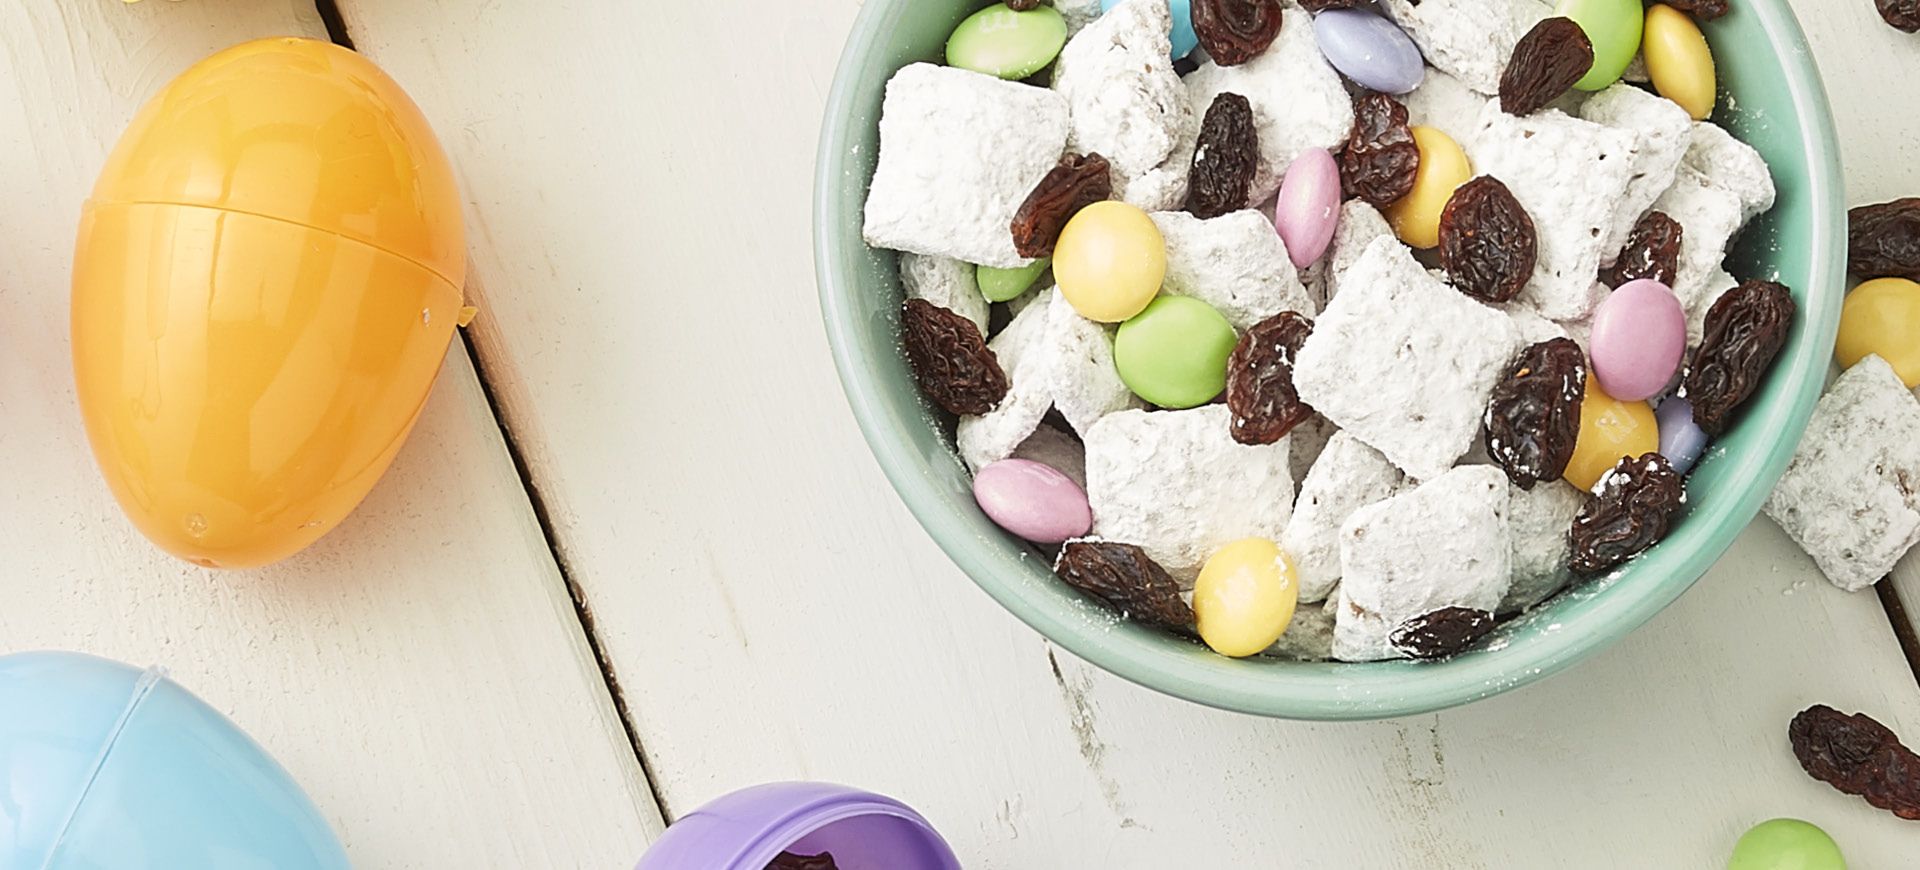 Easter Puppy Chow